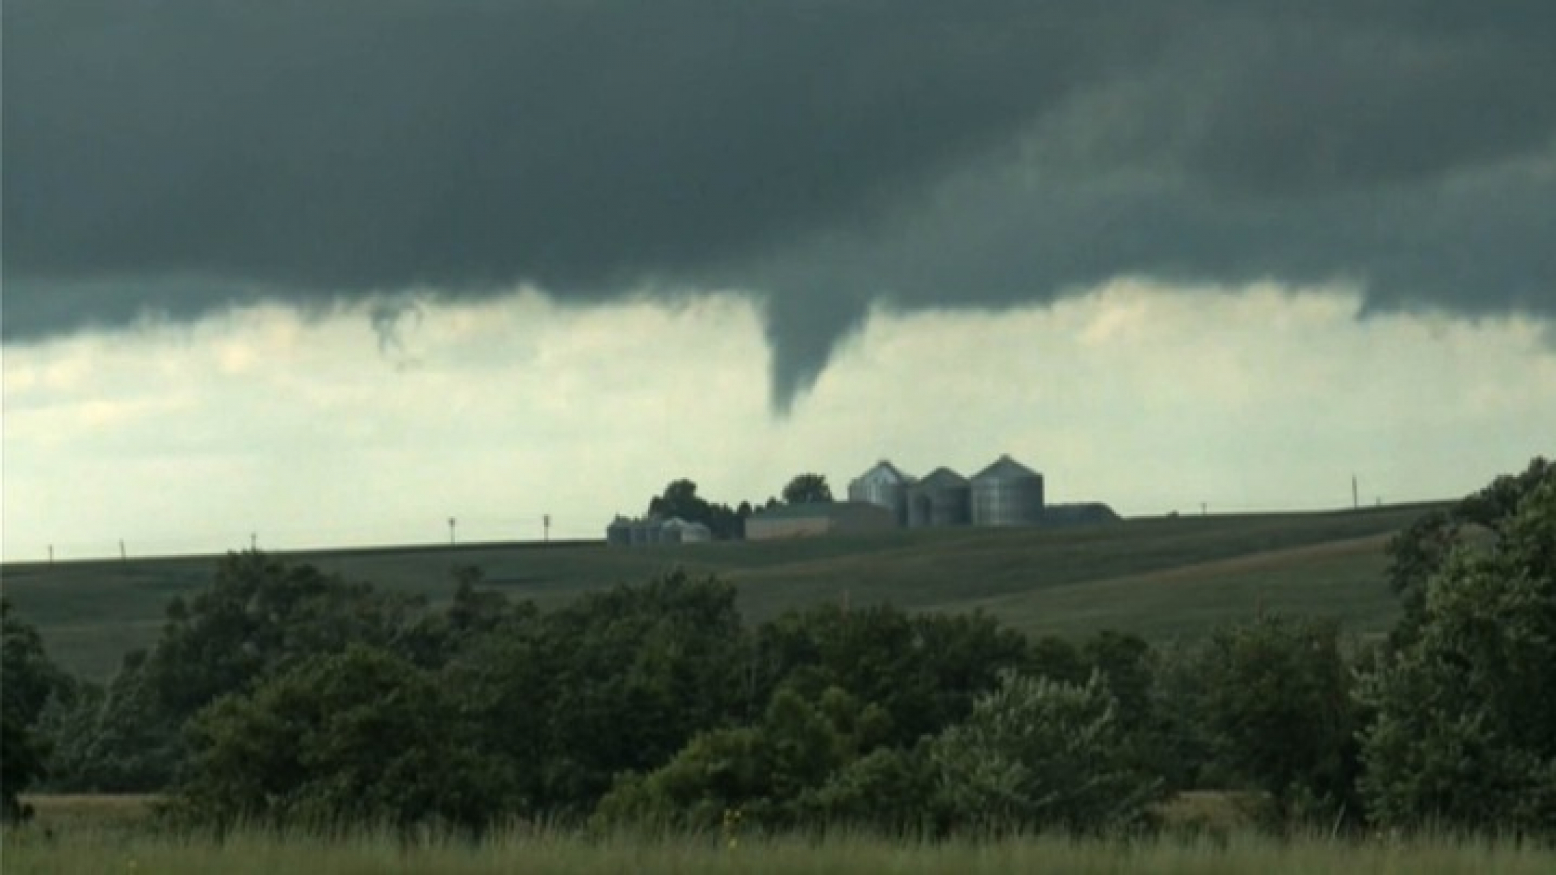 A funnel cloud appears to be forming over a farm